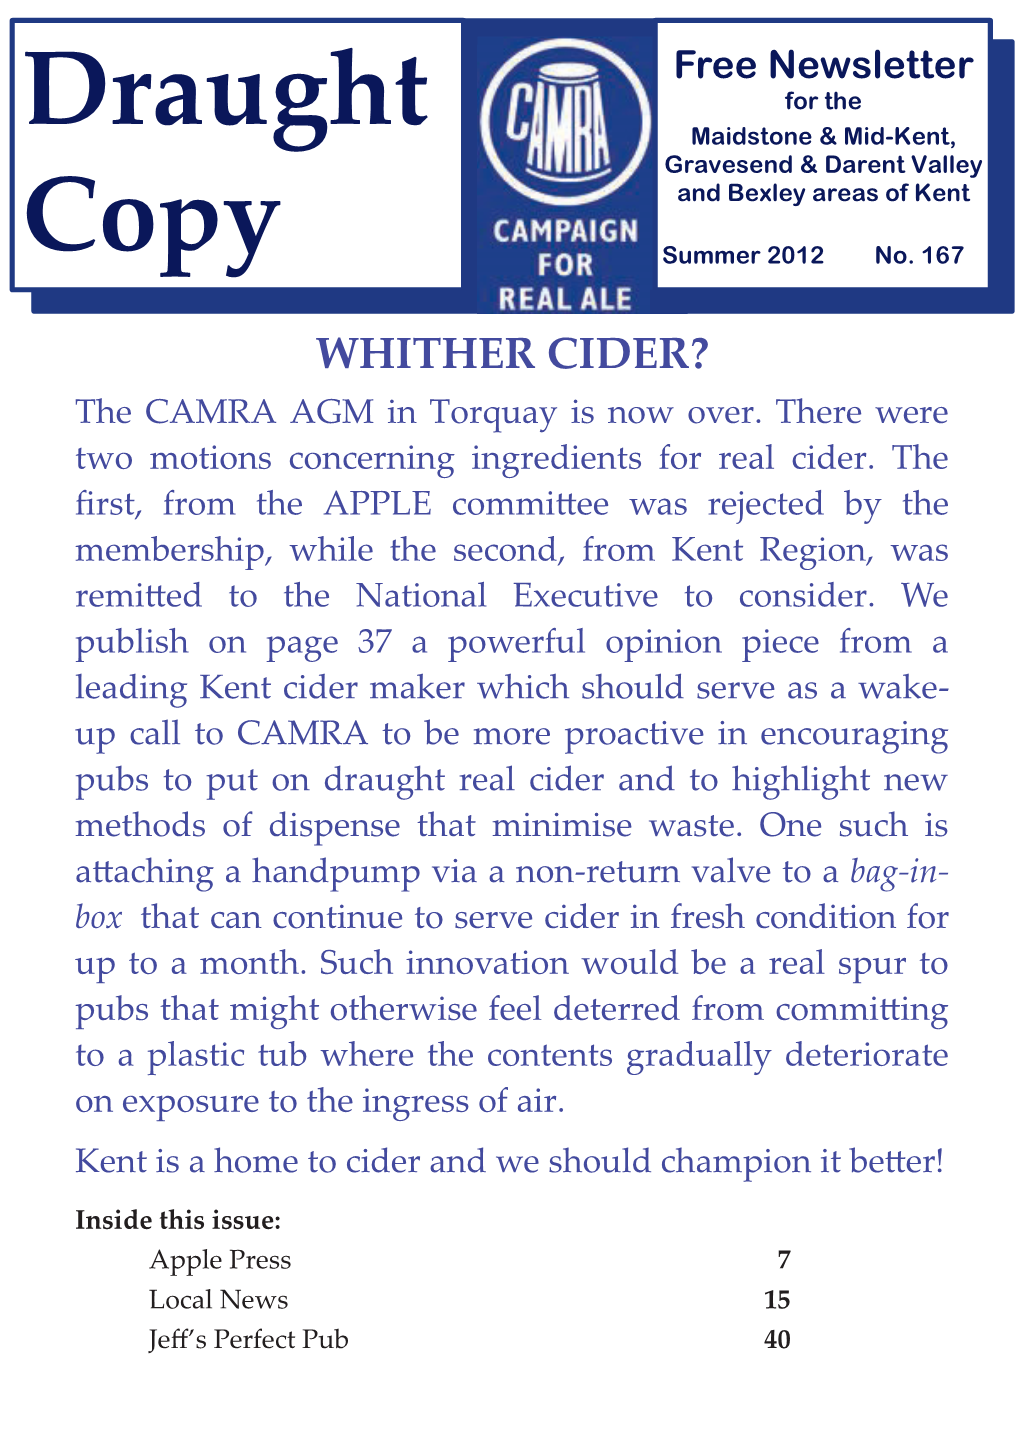 DRAUGHT COPY Draught Copy Is the Newsletter of the Maidstone and Mid-Kent, Bexley, and Gravesend & Darent Valley Branches of CAMRA, the Campaign for Real Ale